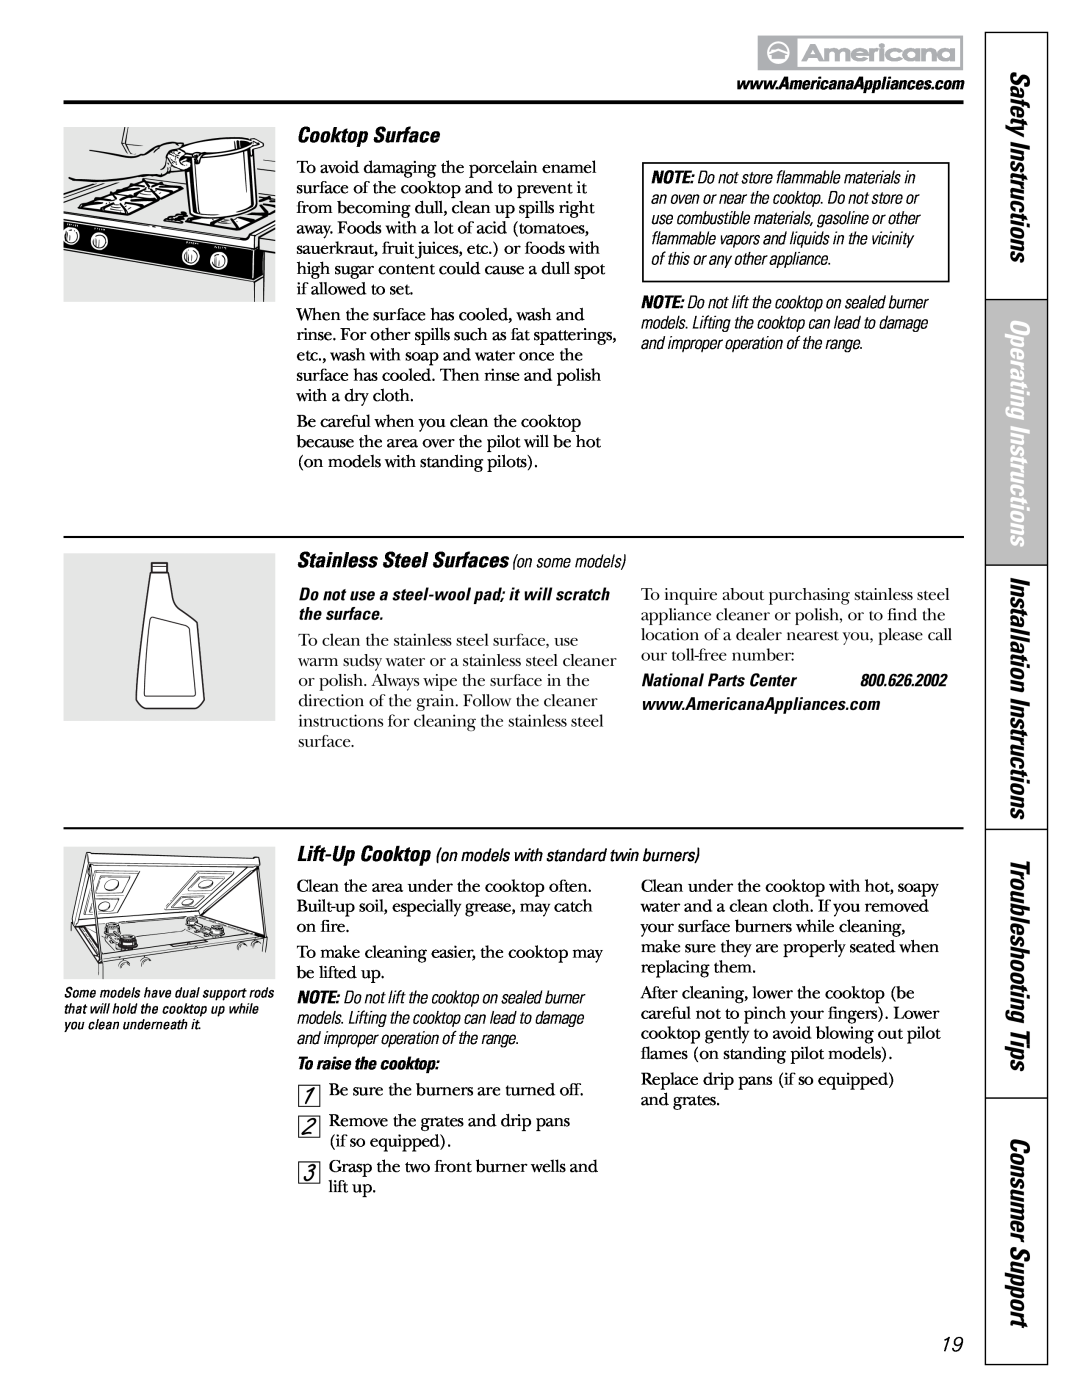 Americana Appliances AGBS300 Installation Instructions, Troubleshooting Tips Consumer Support, Cooktop Surface, Safety 